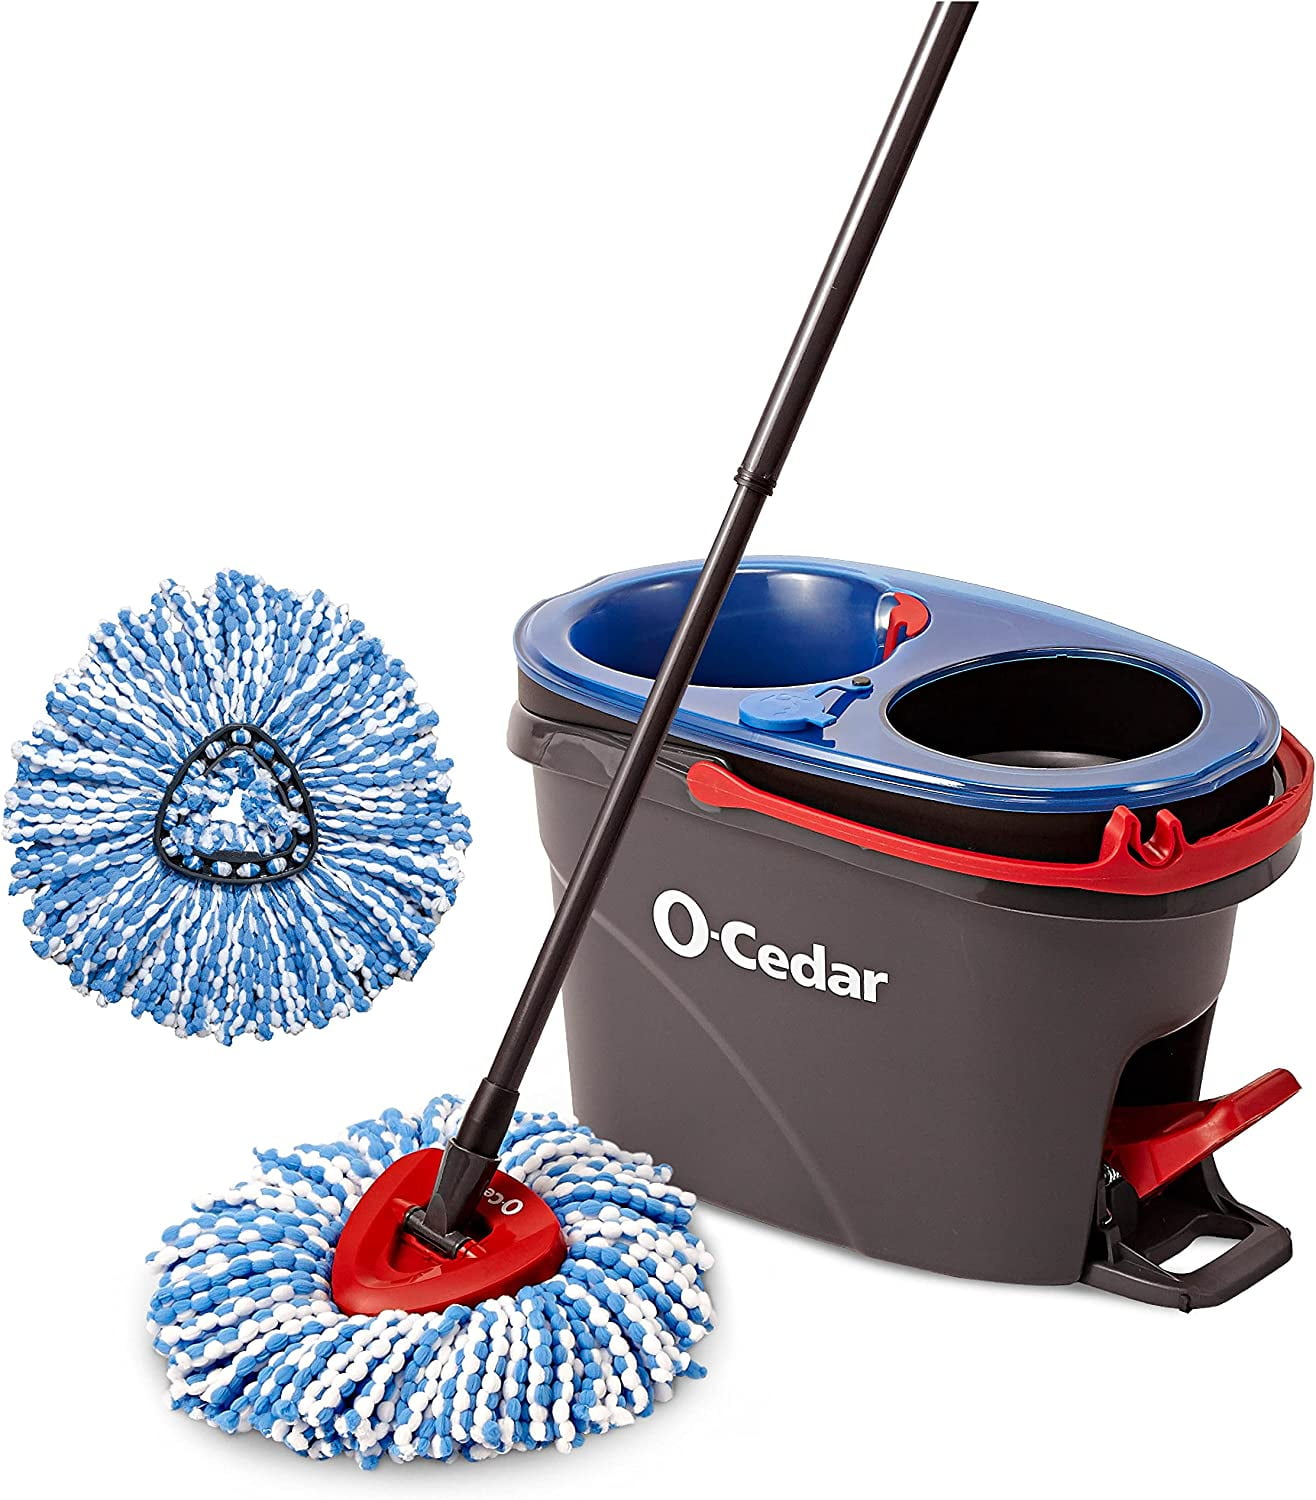 O-Cedar EasyWring RinseClean Spin Mop & Bucket Floor Cleaning System with 1  Extra Refill (Pack of 1)